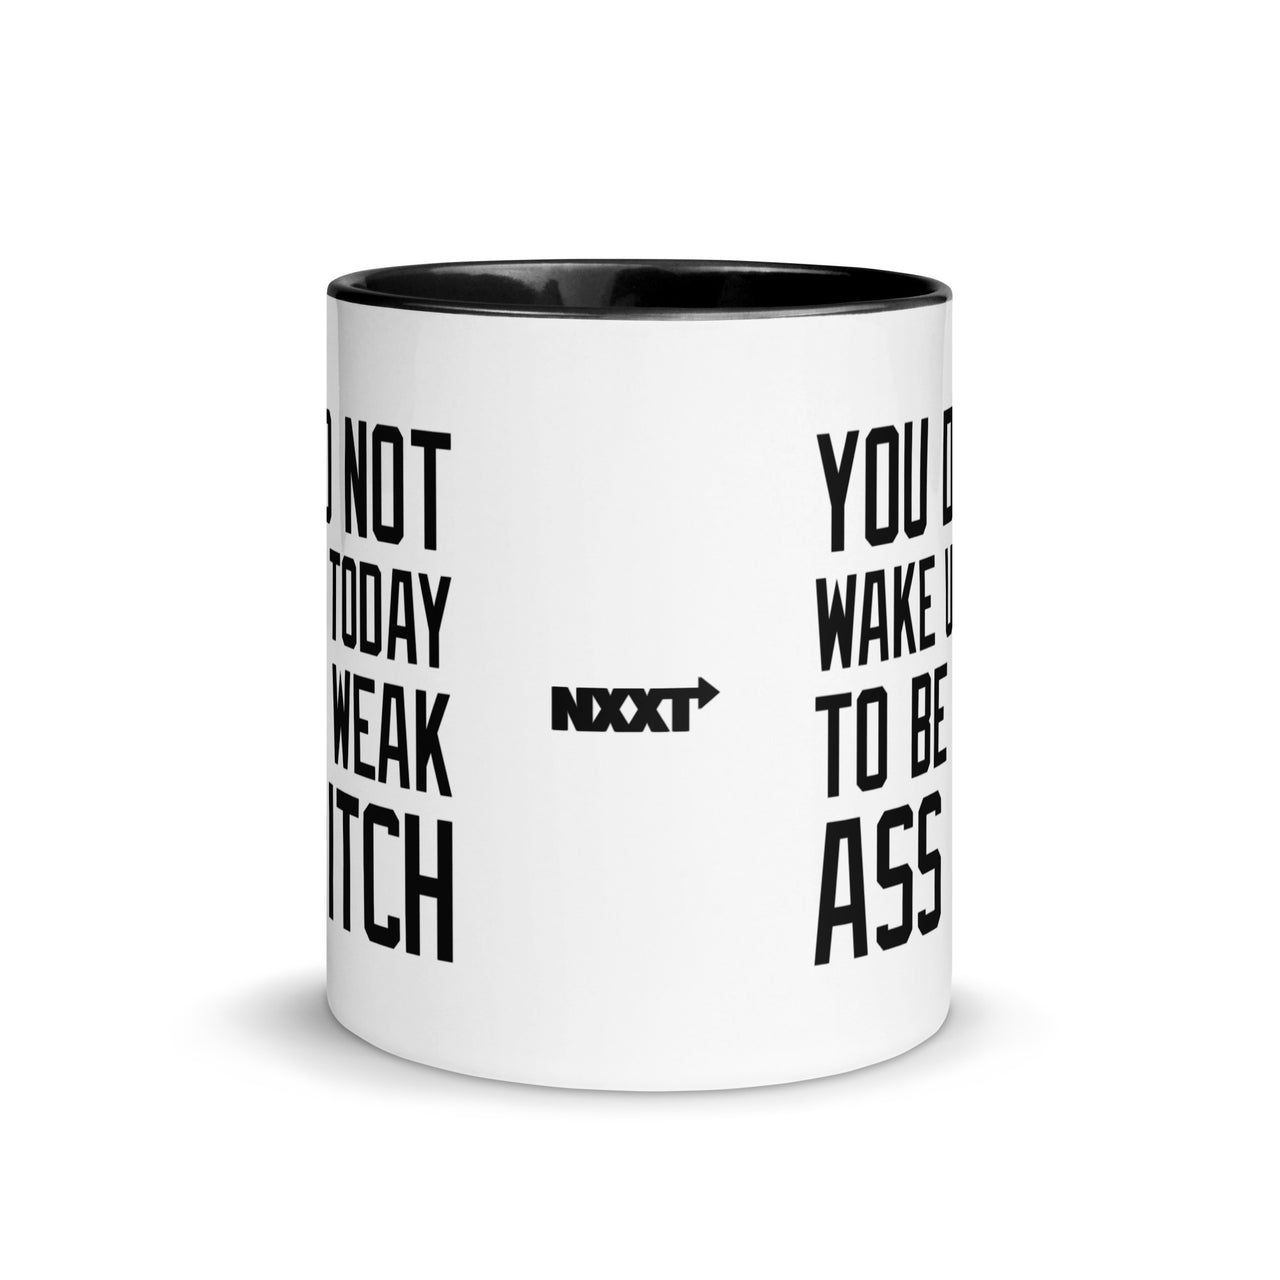 "You did not wake up today to..." 11oz two tone coffee mug multiple colors - Shady Lion Coffee Co.